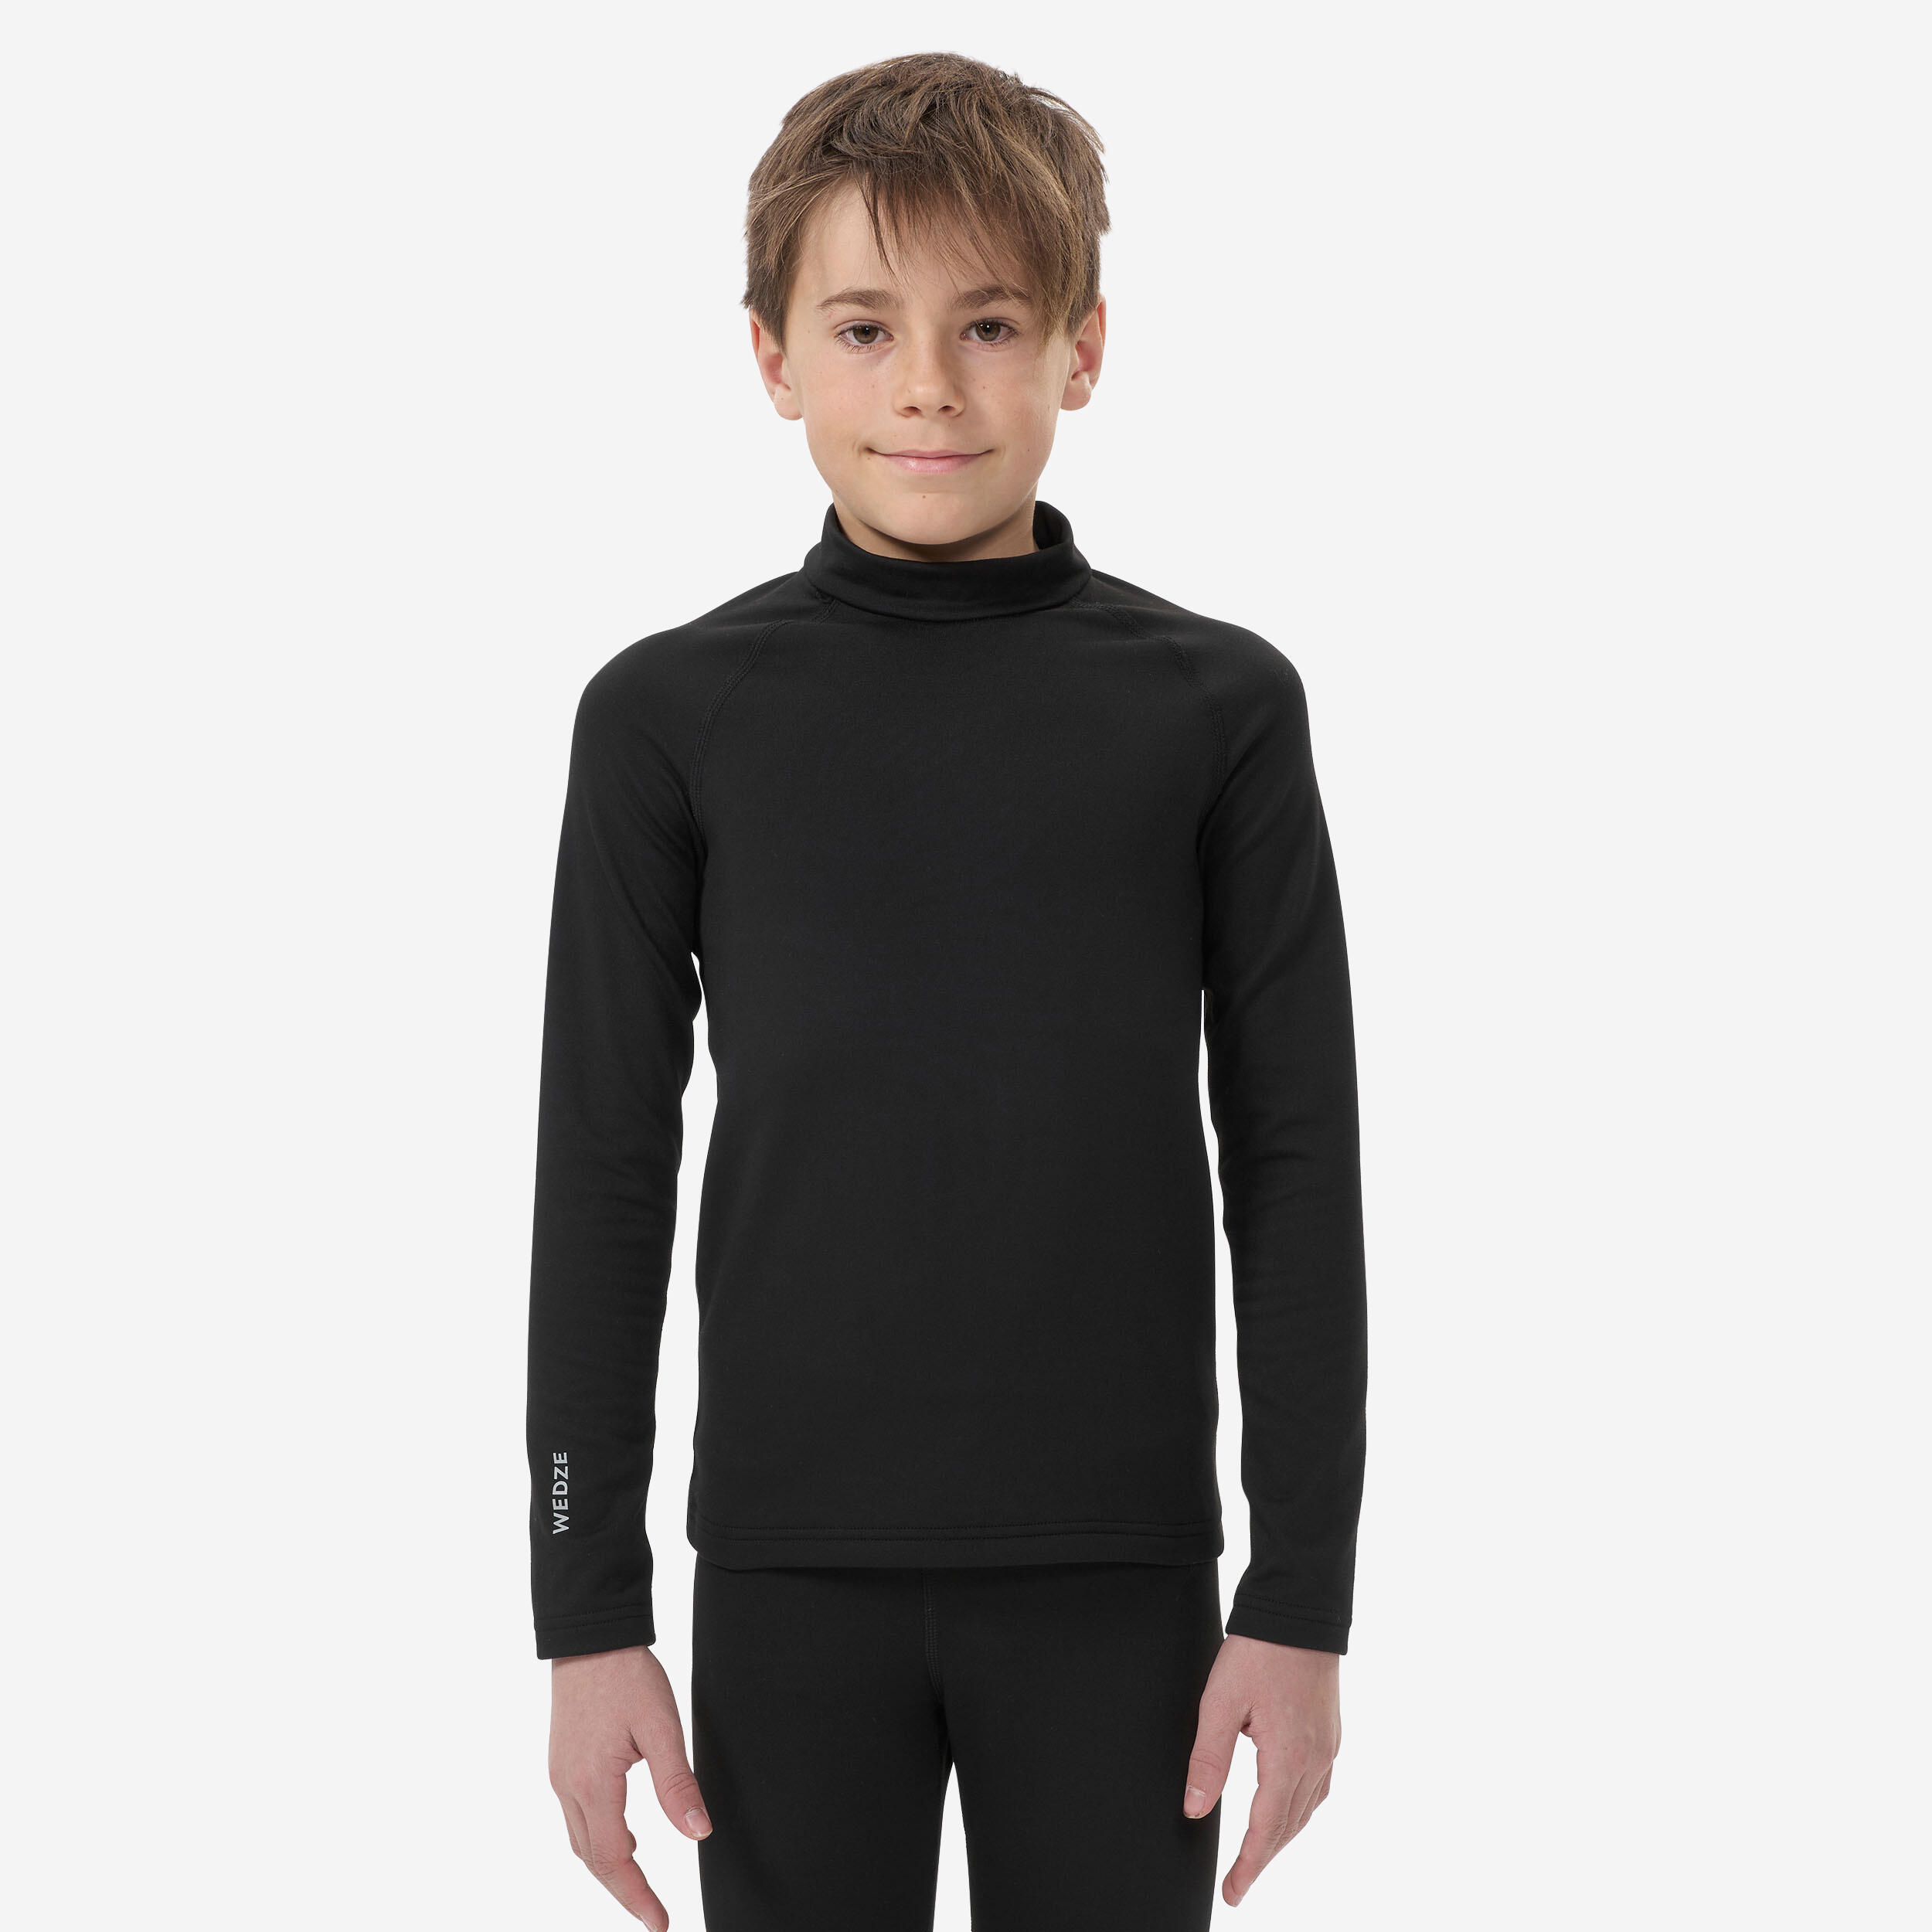 Waa Baby - Boys & Girls THERMAL WEAR now available (Bodycare